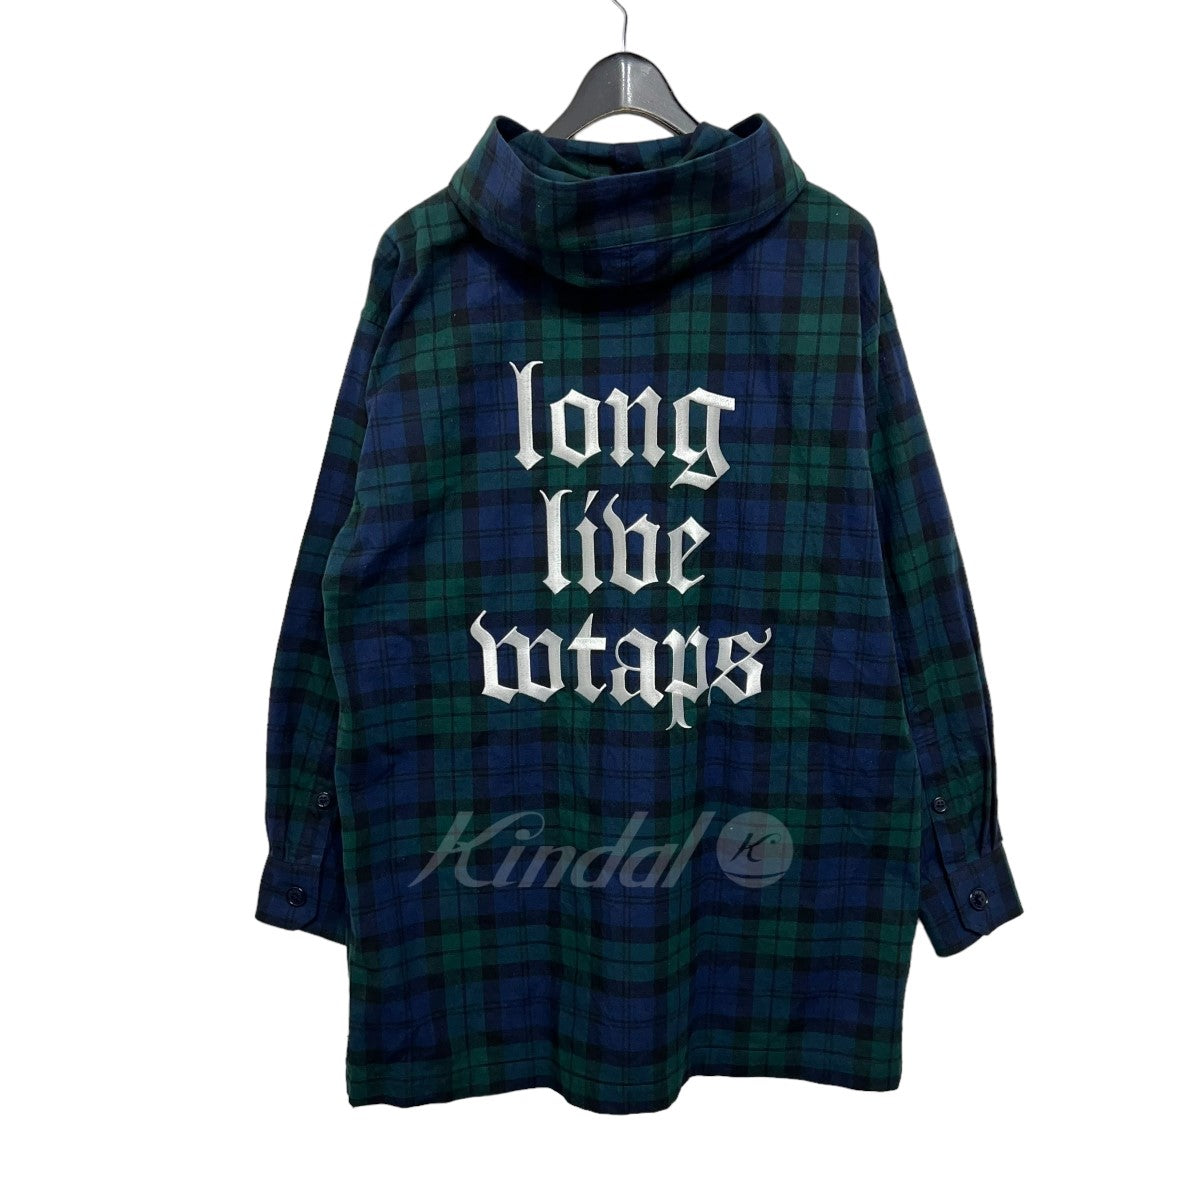 WTAPS(ダブルタップス) BOUT JACKET COTTON． FLANNEL． 221TQDT-JKM02 ...